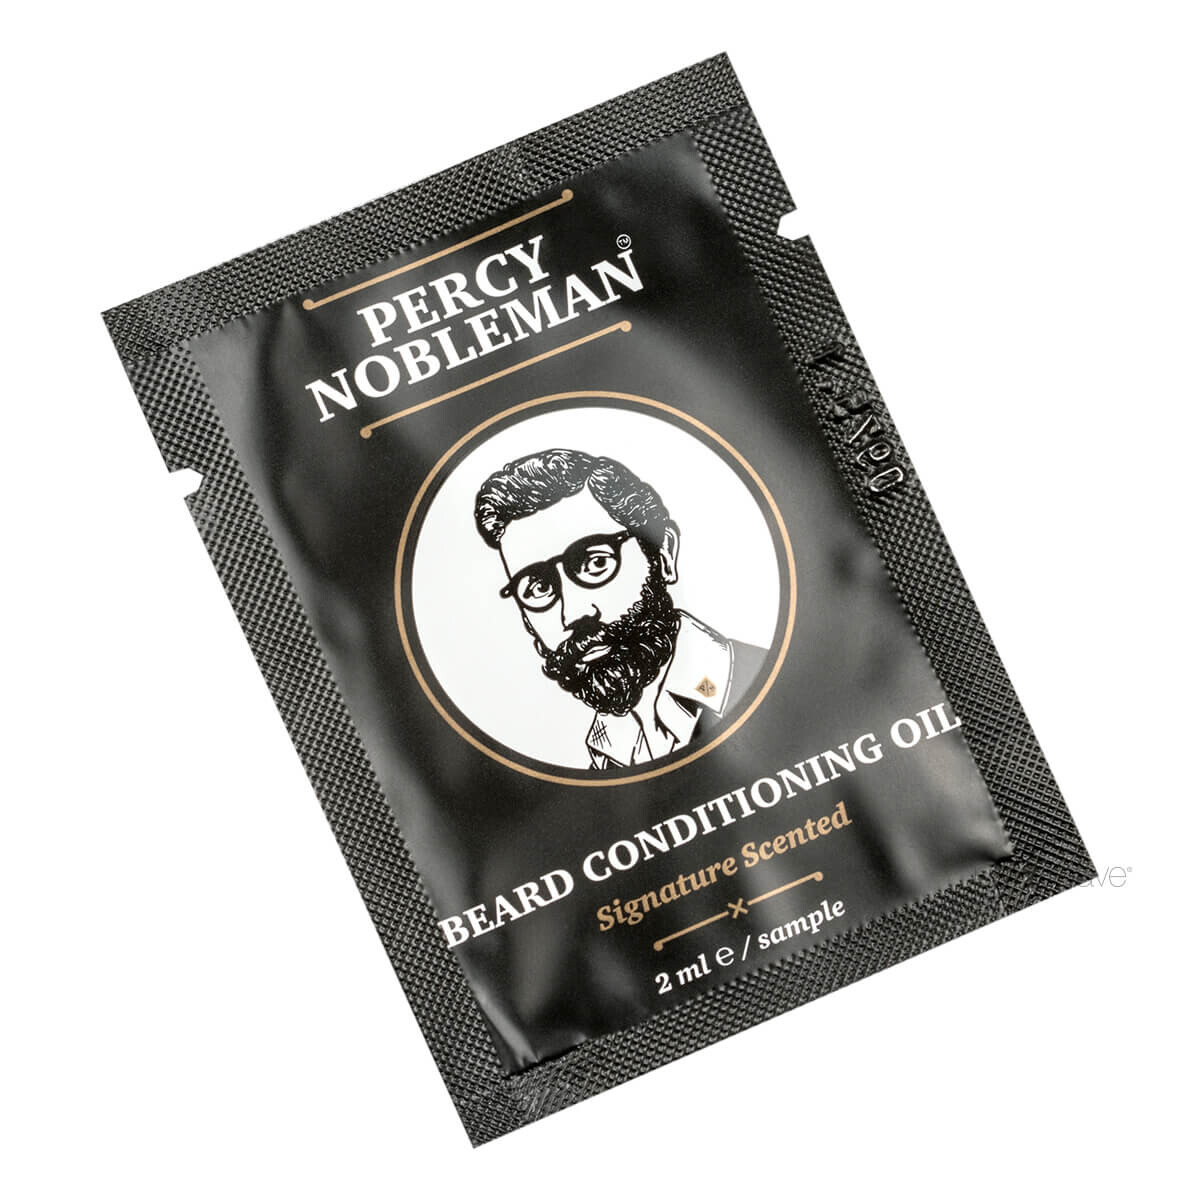 Percy Nobleman Beard Oil, Scented, SAMPLE, 2 ml.